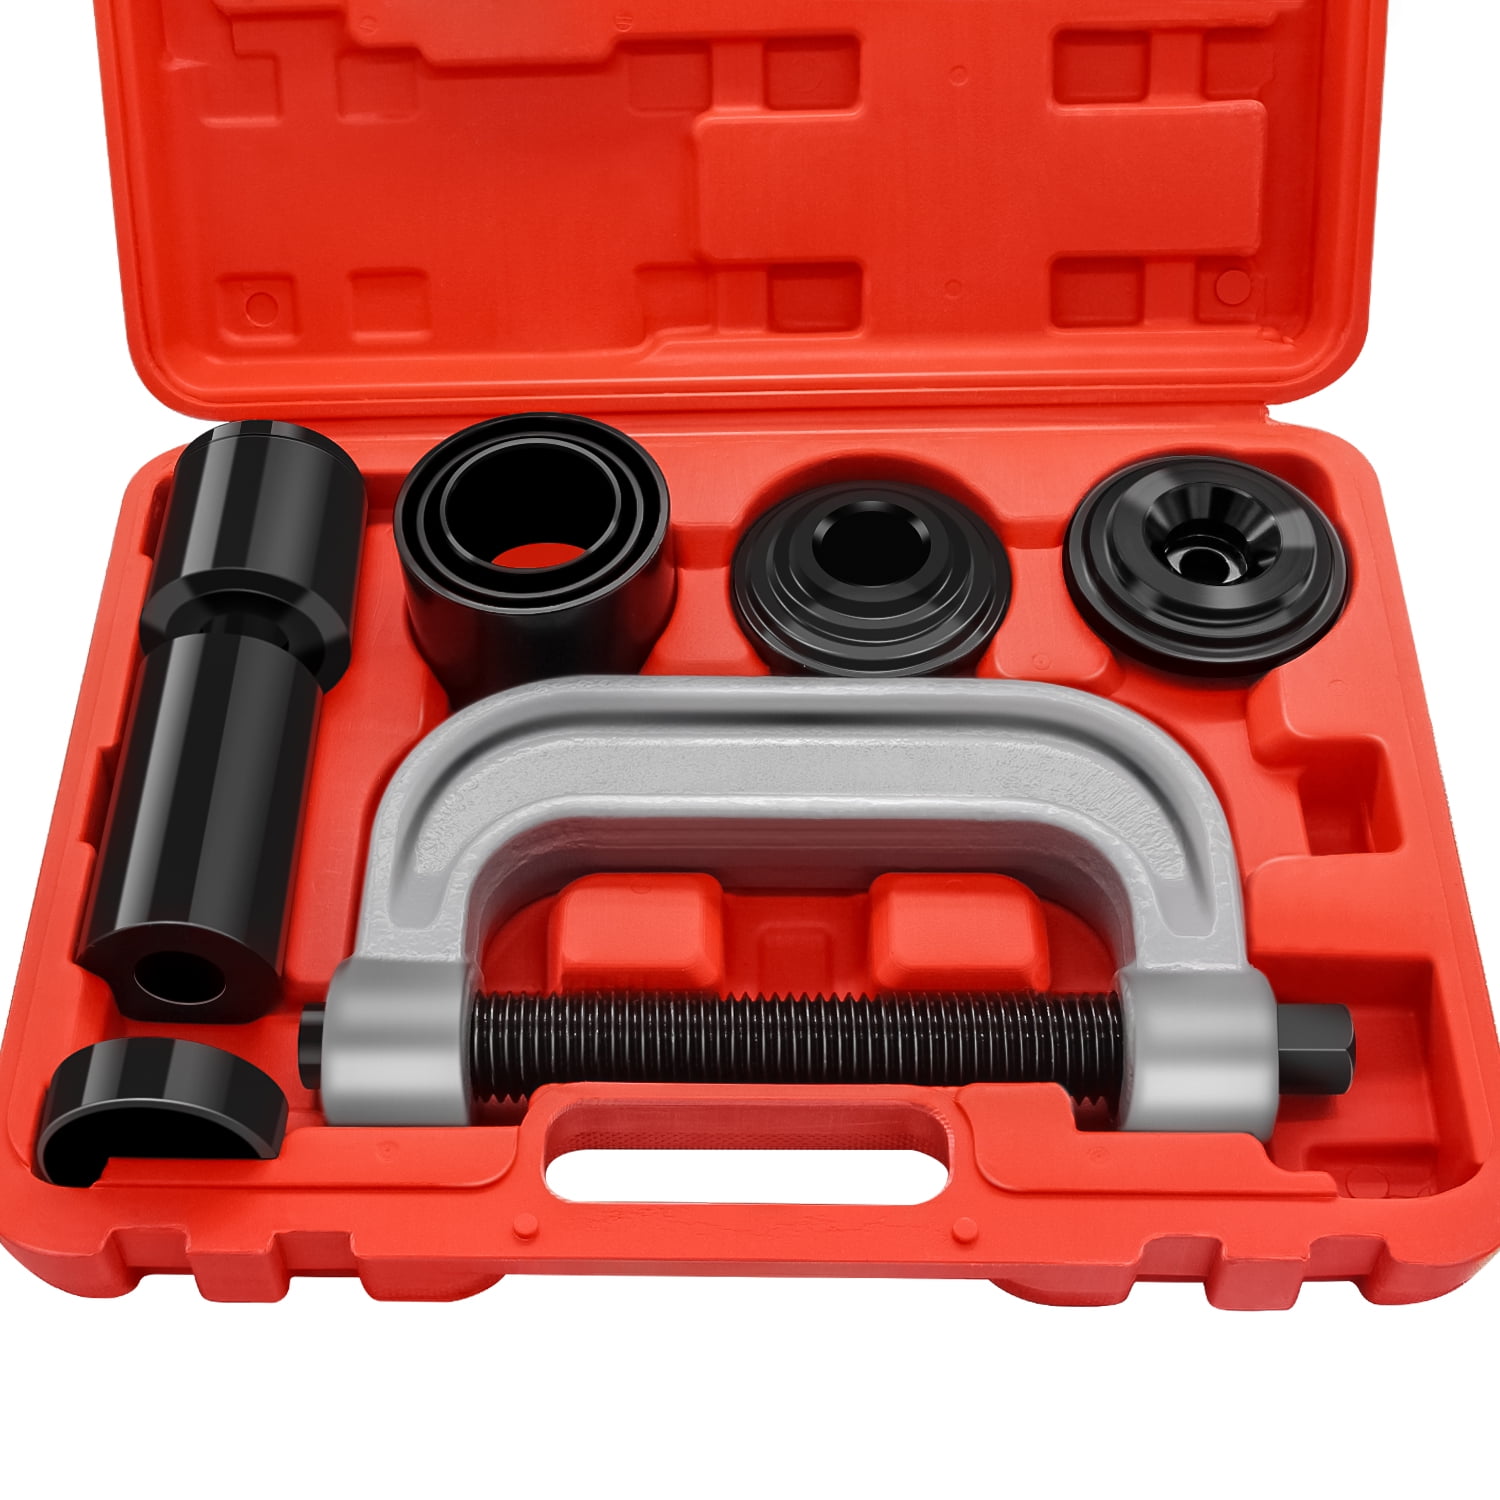 4 IN 1 BALL JOINT SERVICE SET for 2WD&4WD Press-fit  INSTALLATION REMOVER KIT 